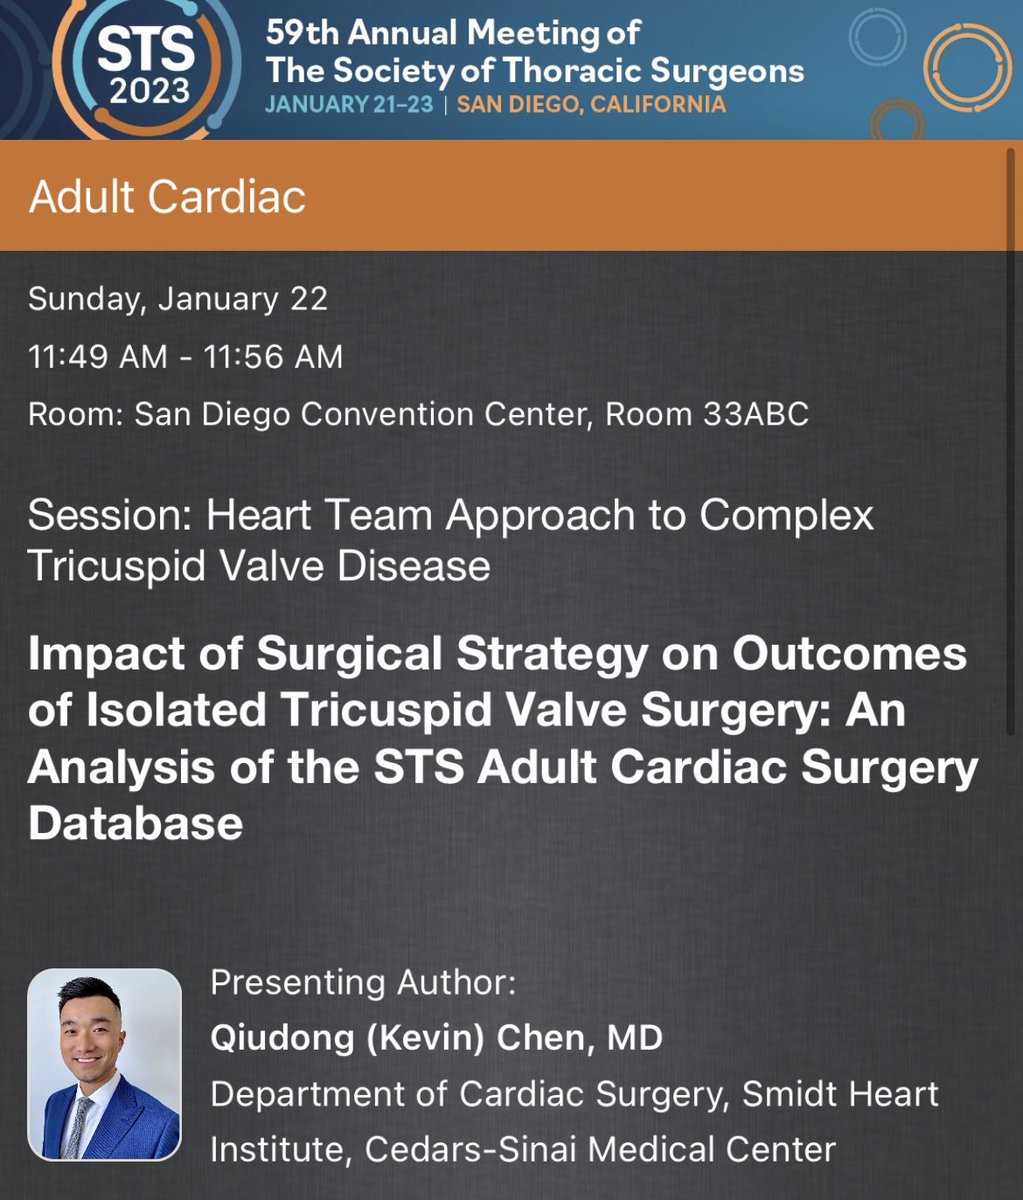 Headed to SD for the @STS_CTsurgery annual meeting! Very excited to share our analysis on isolated tricuspid surgery using the national STS adult cardiac surgery database on Sunday 1/22 #STS2023 @CedarsCTSurgery @GenSurg_CS